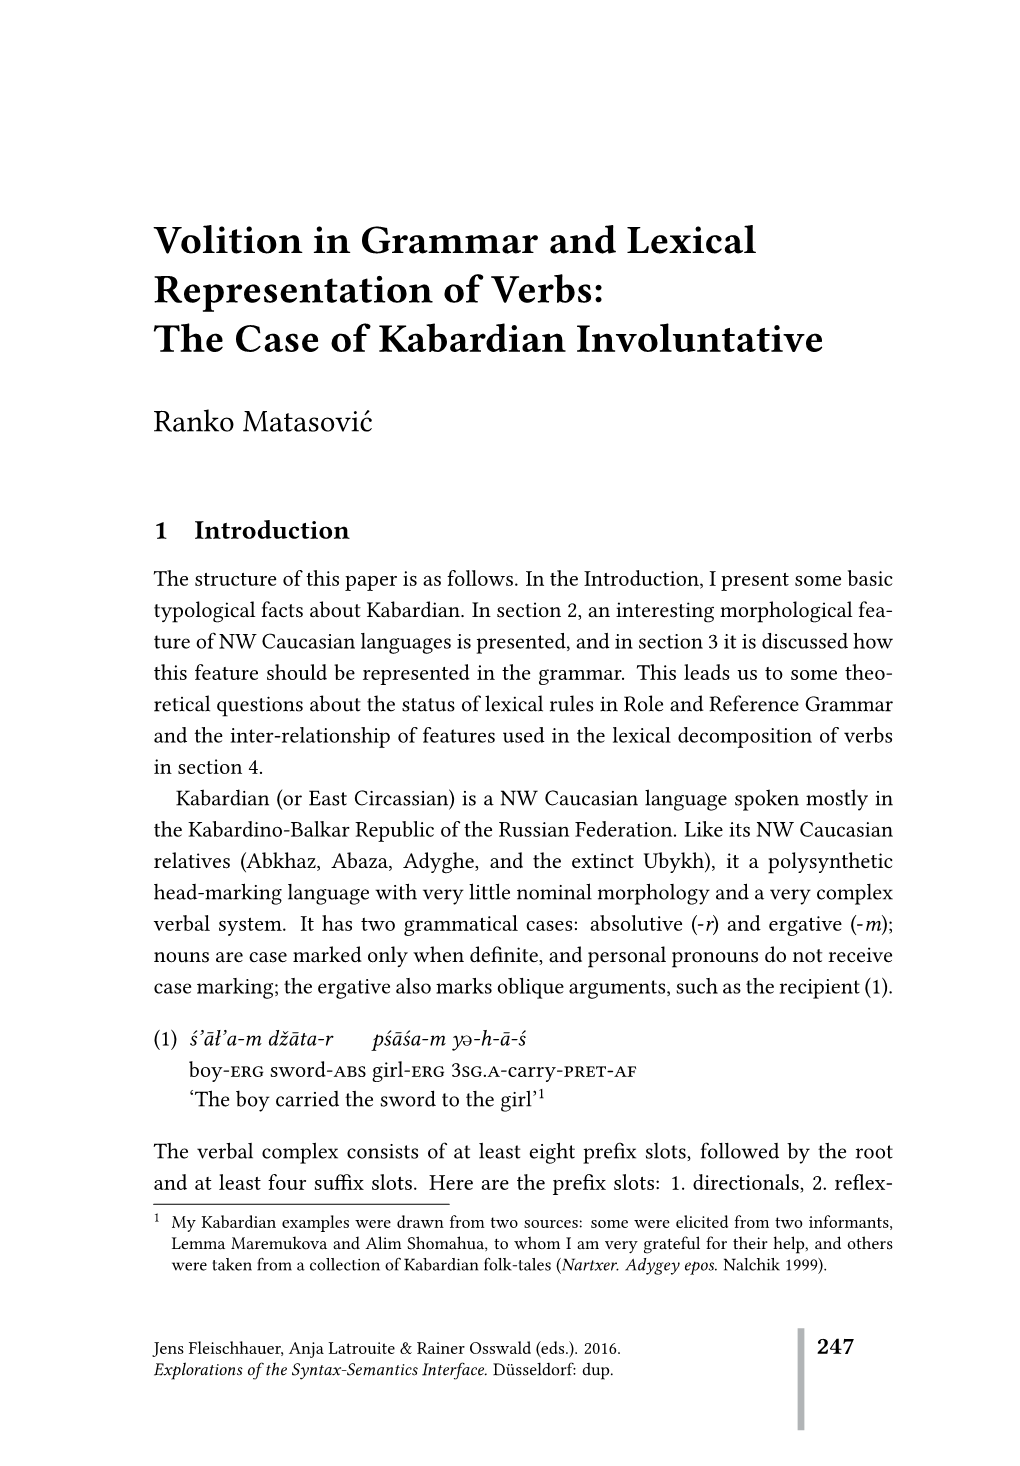 Volition in Grammar and Lexical Representation of Verbs: the Case of Kabardian Involuntative